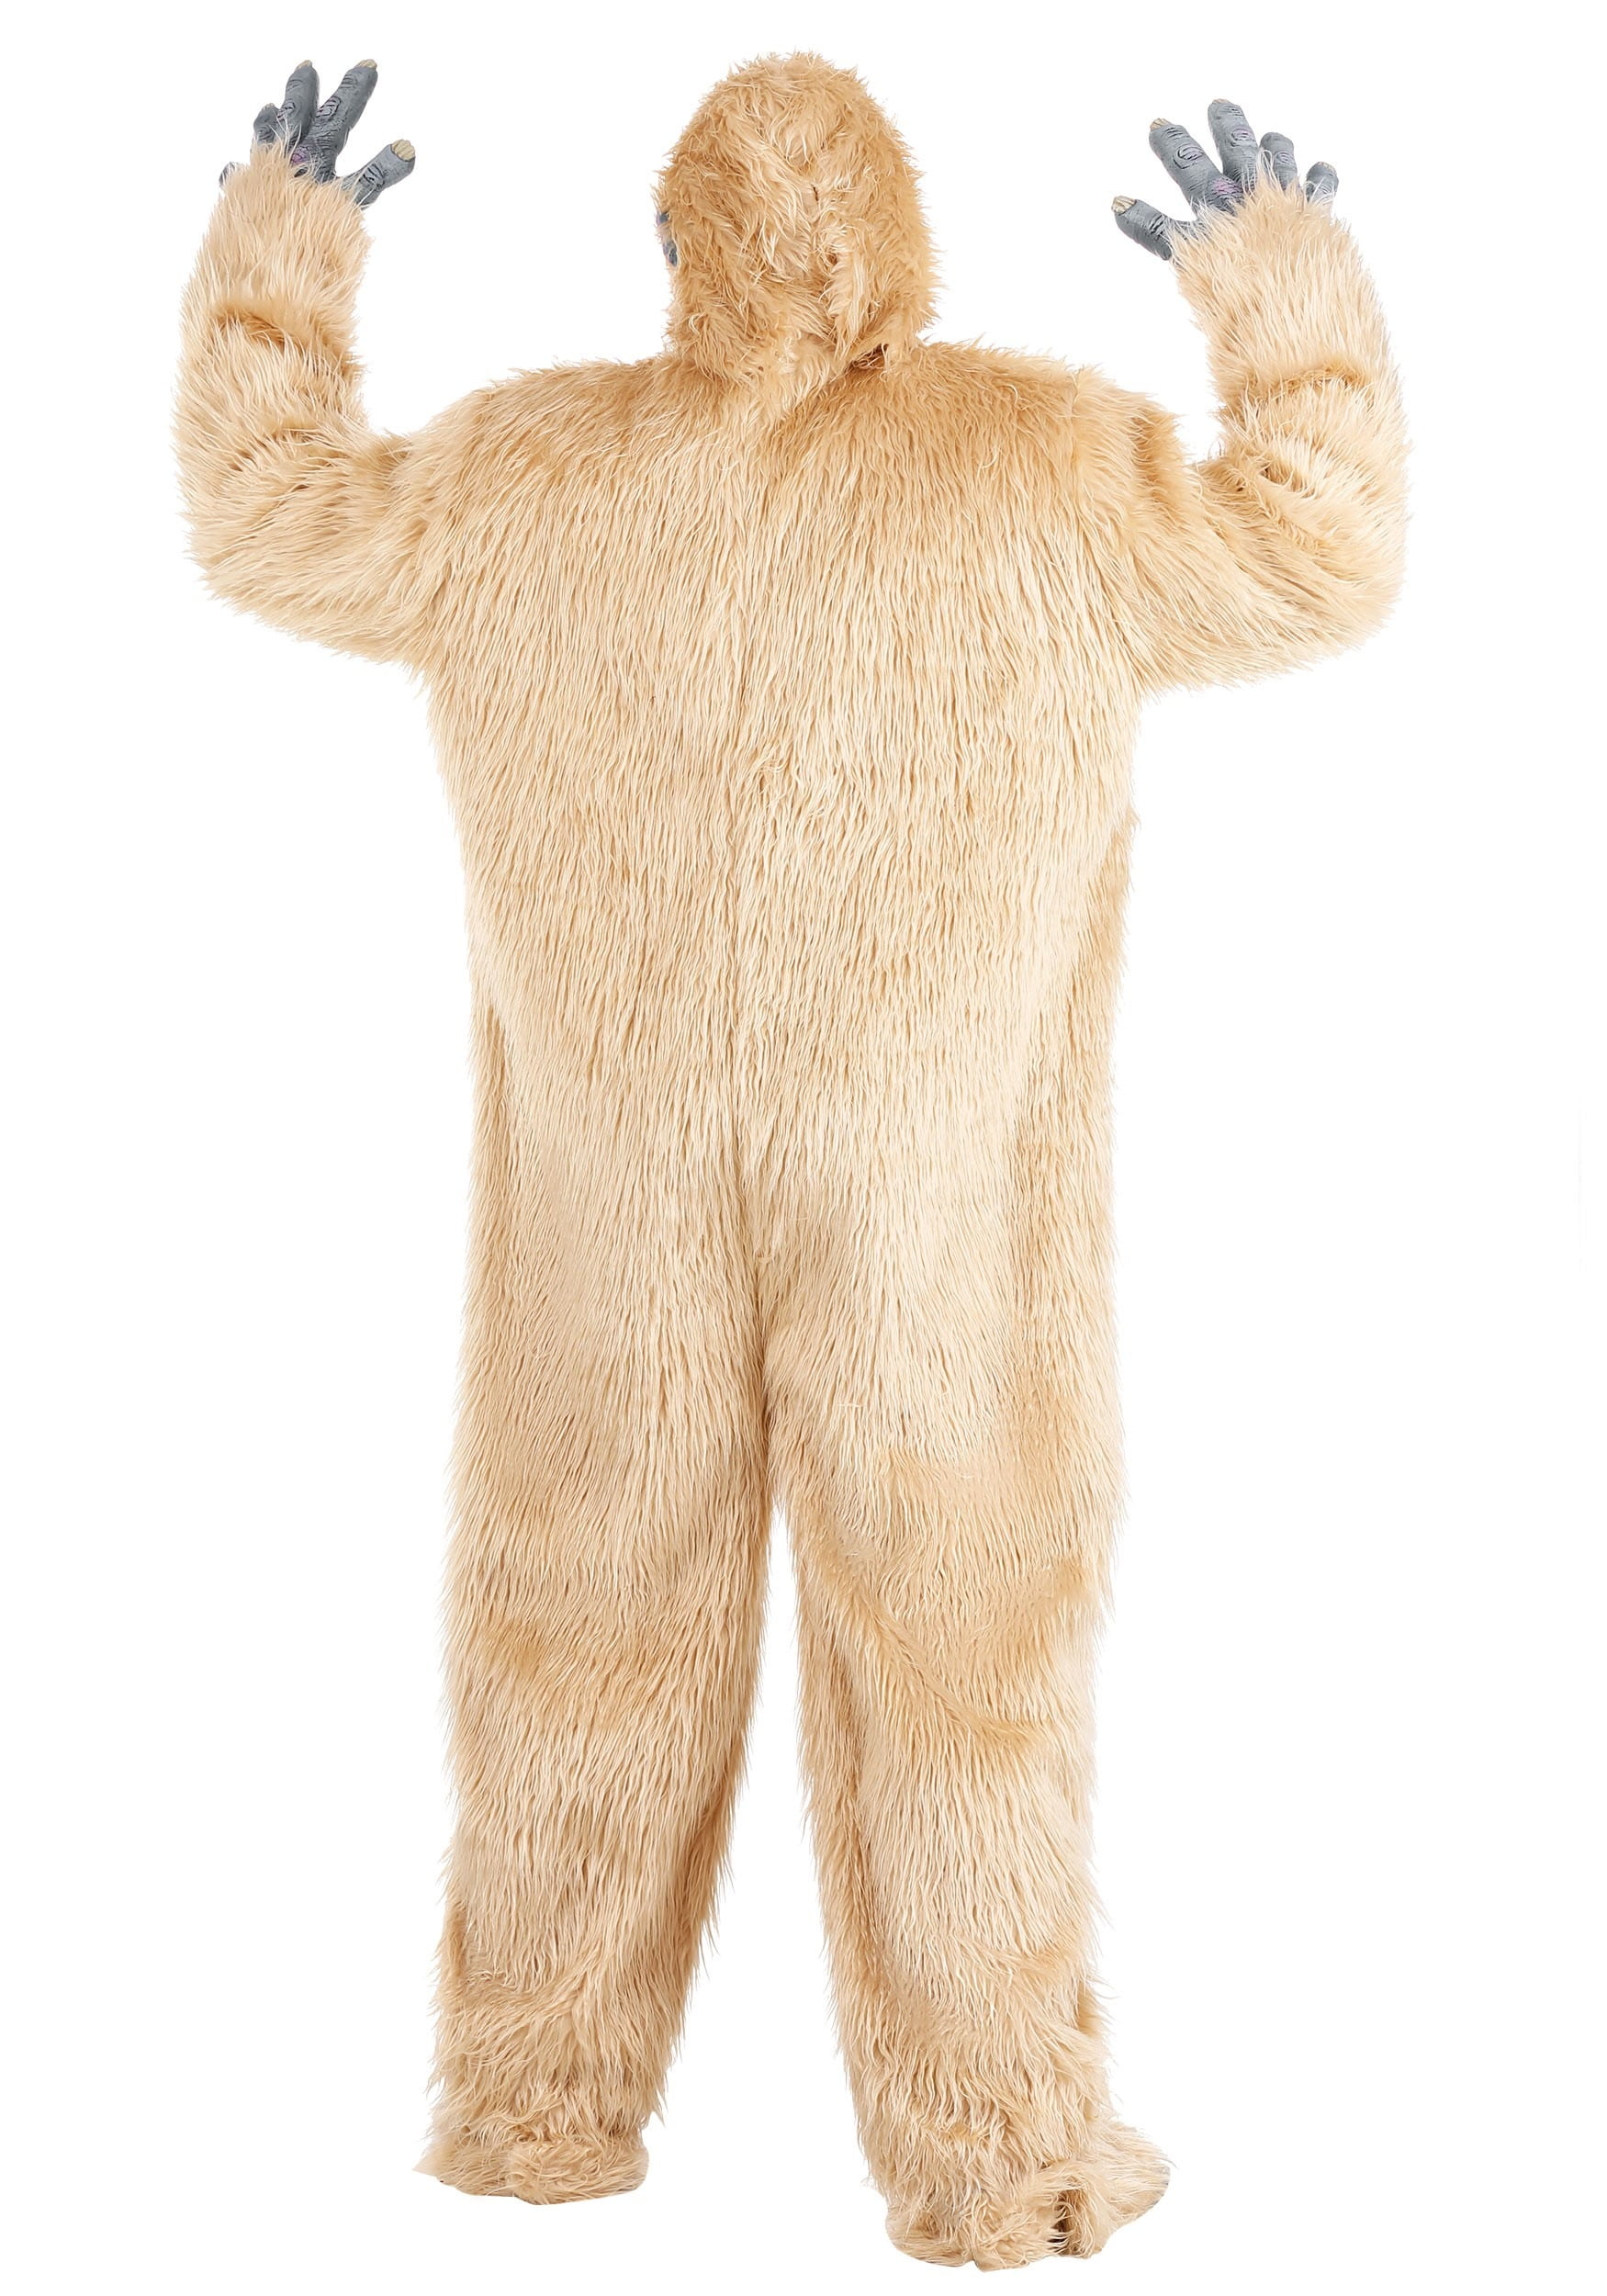 Andies Boutique Yeti  Yeti, Couples costumes, Halloween outfits